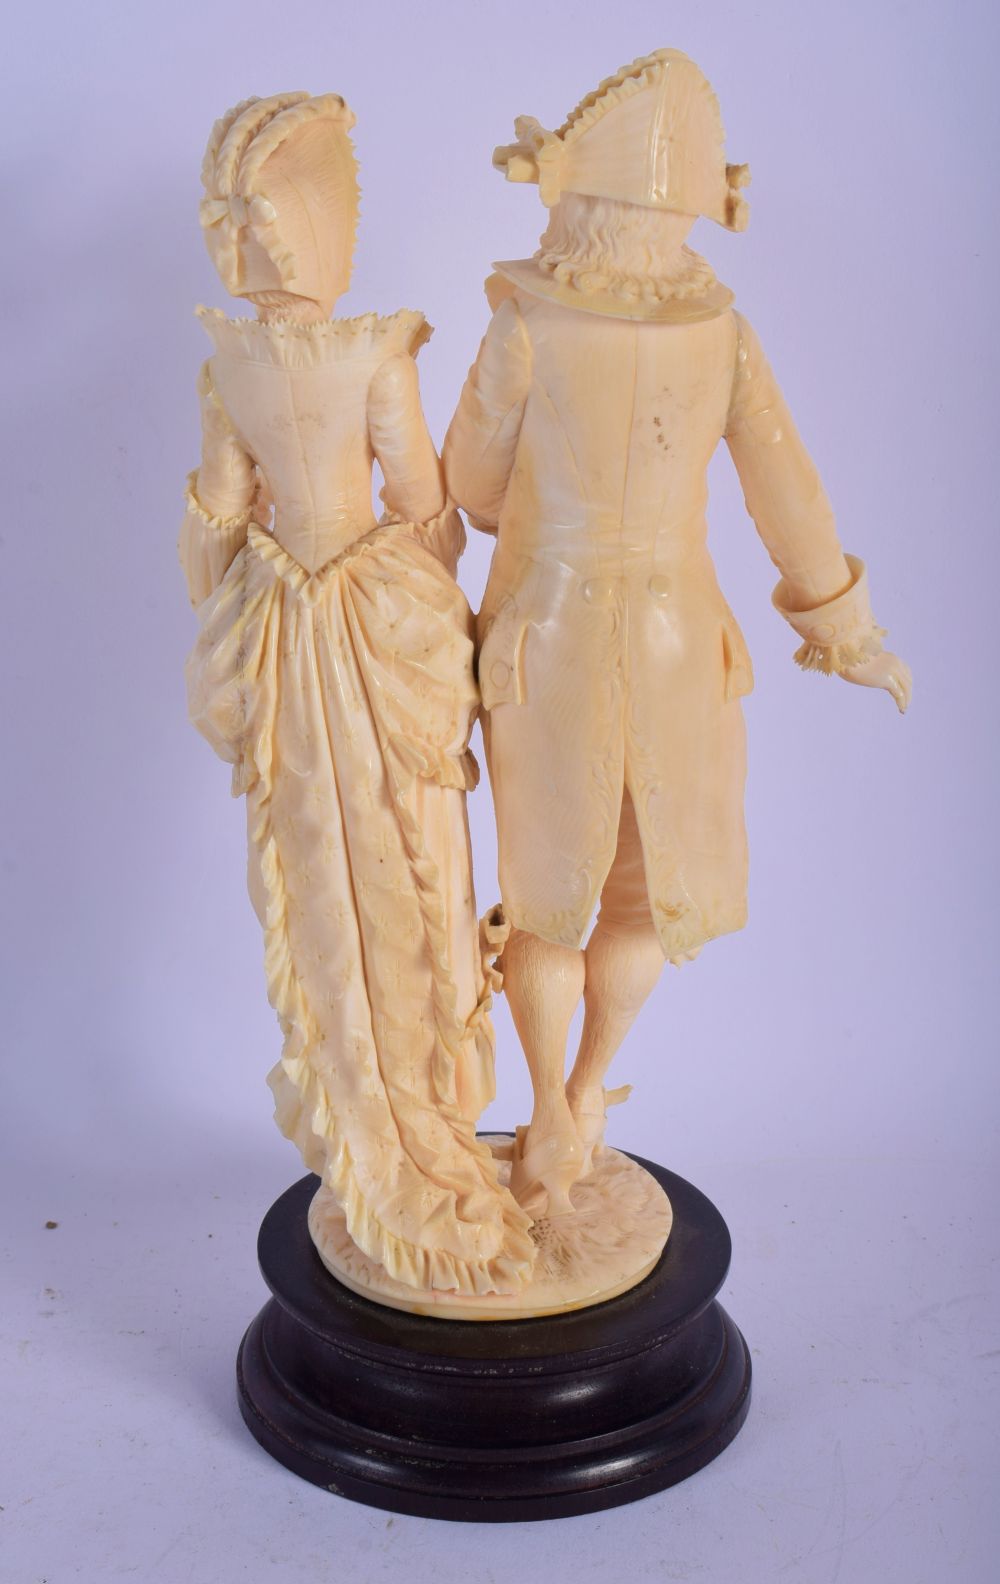 A 19TH CENTURY EUROPEAN CARVED IVORY FIGURAL GROUP modelled as a dandy and female upon a wooden base - Image 2 of 3